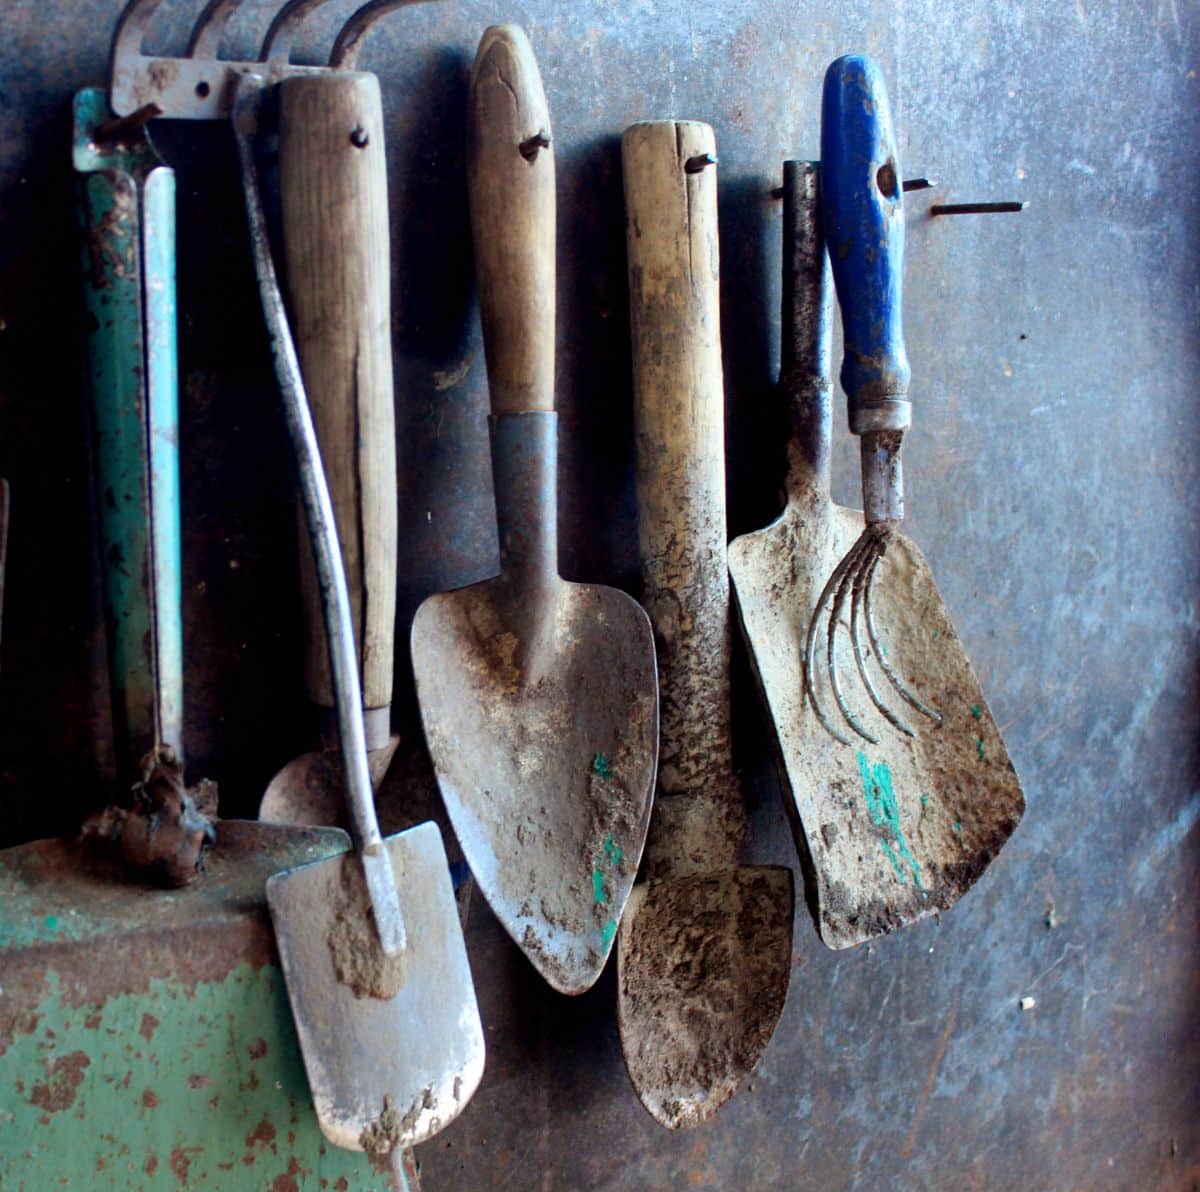 Dirty garden tools stored improperly